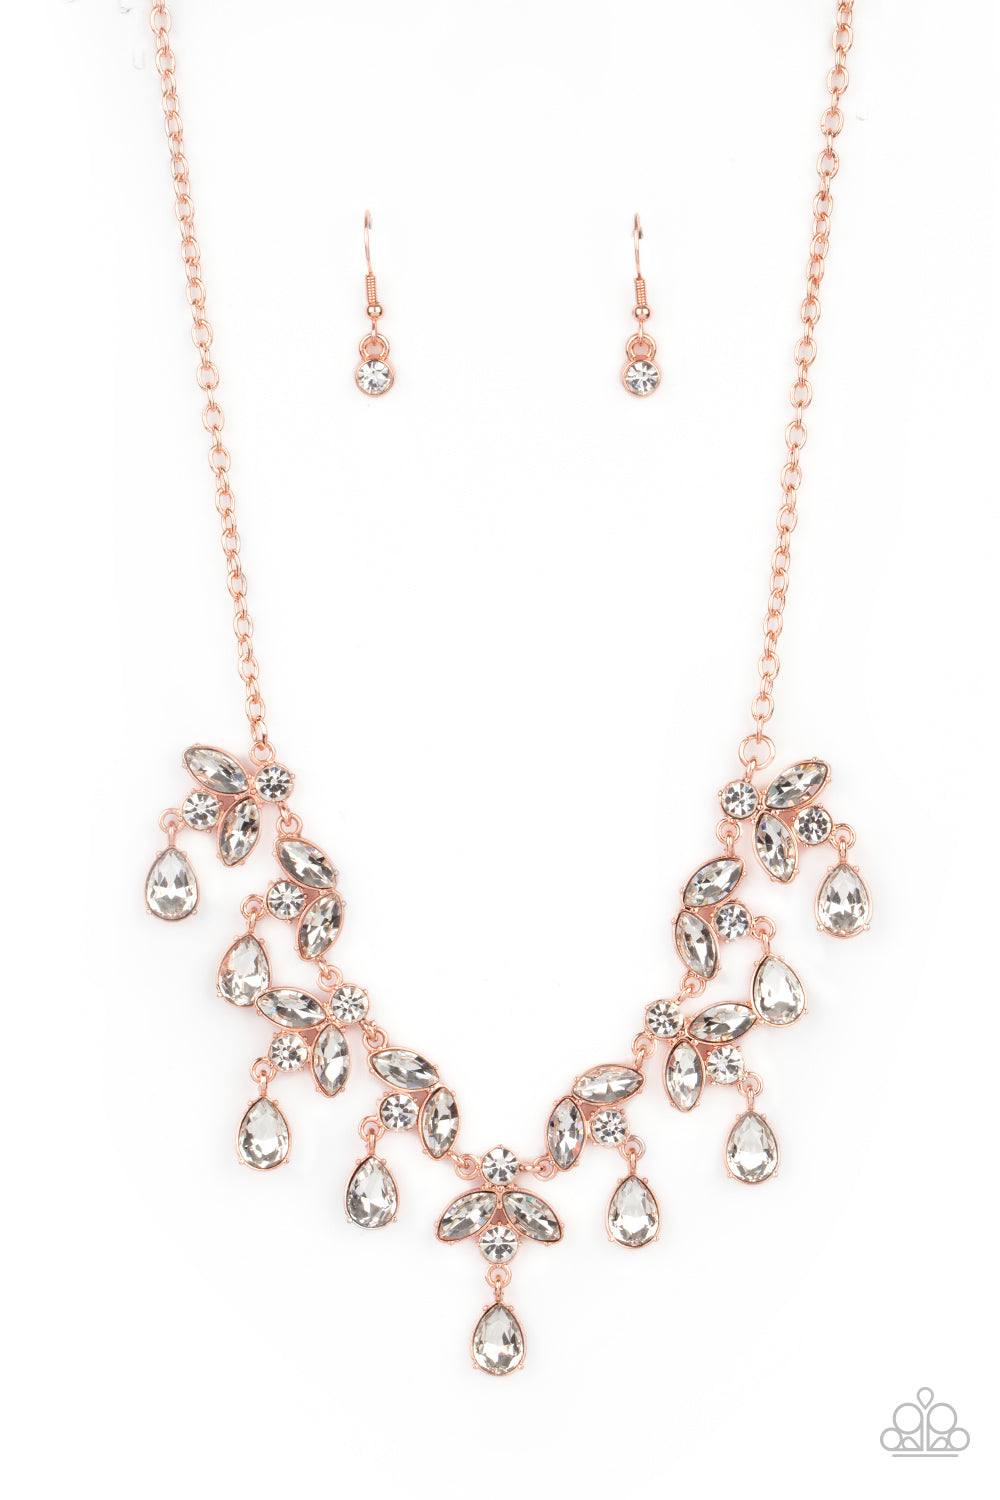 Paparazzi Vintage Royale - Copper Necklace - A Finishing Touch Jewelry